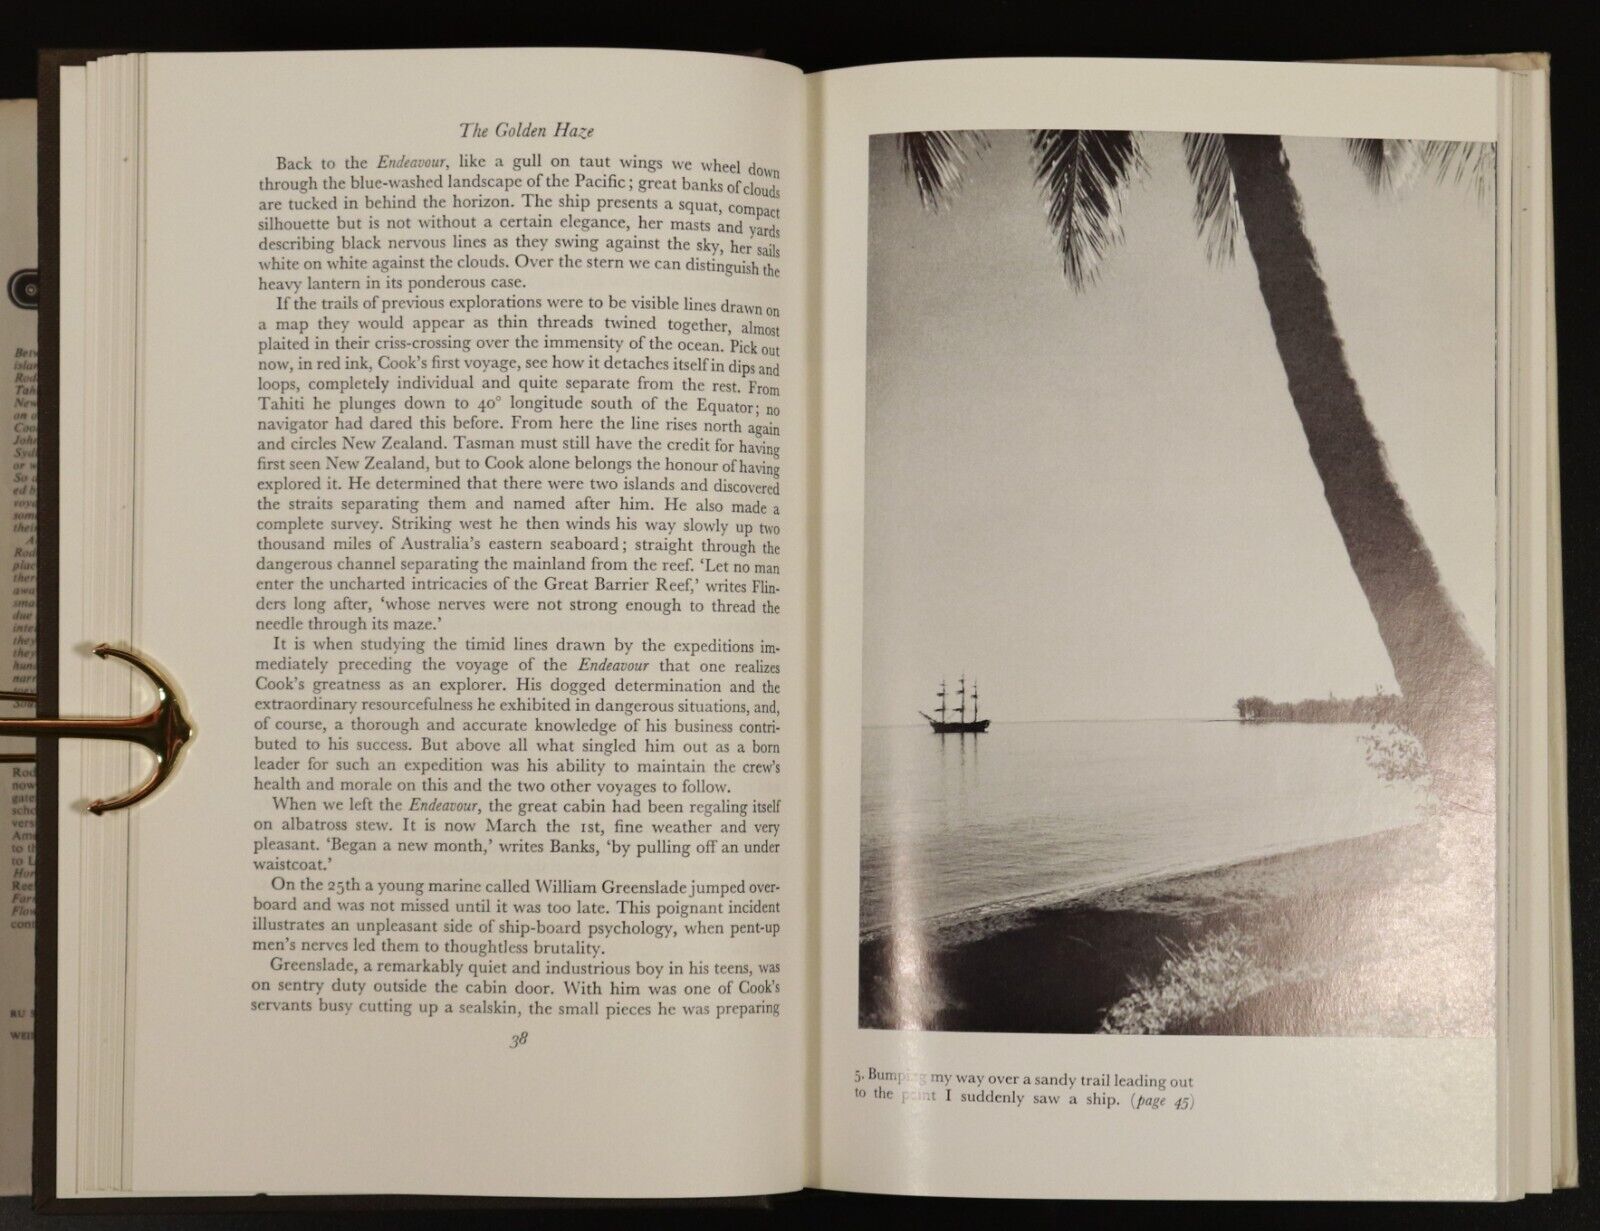 1965 The Golden Haze: Captain Cook In South Pacific Exploration History Book